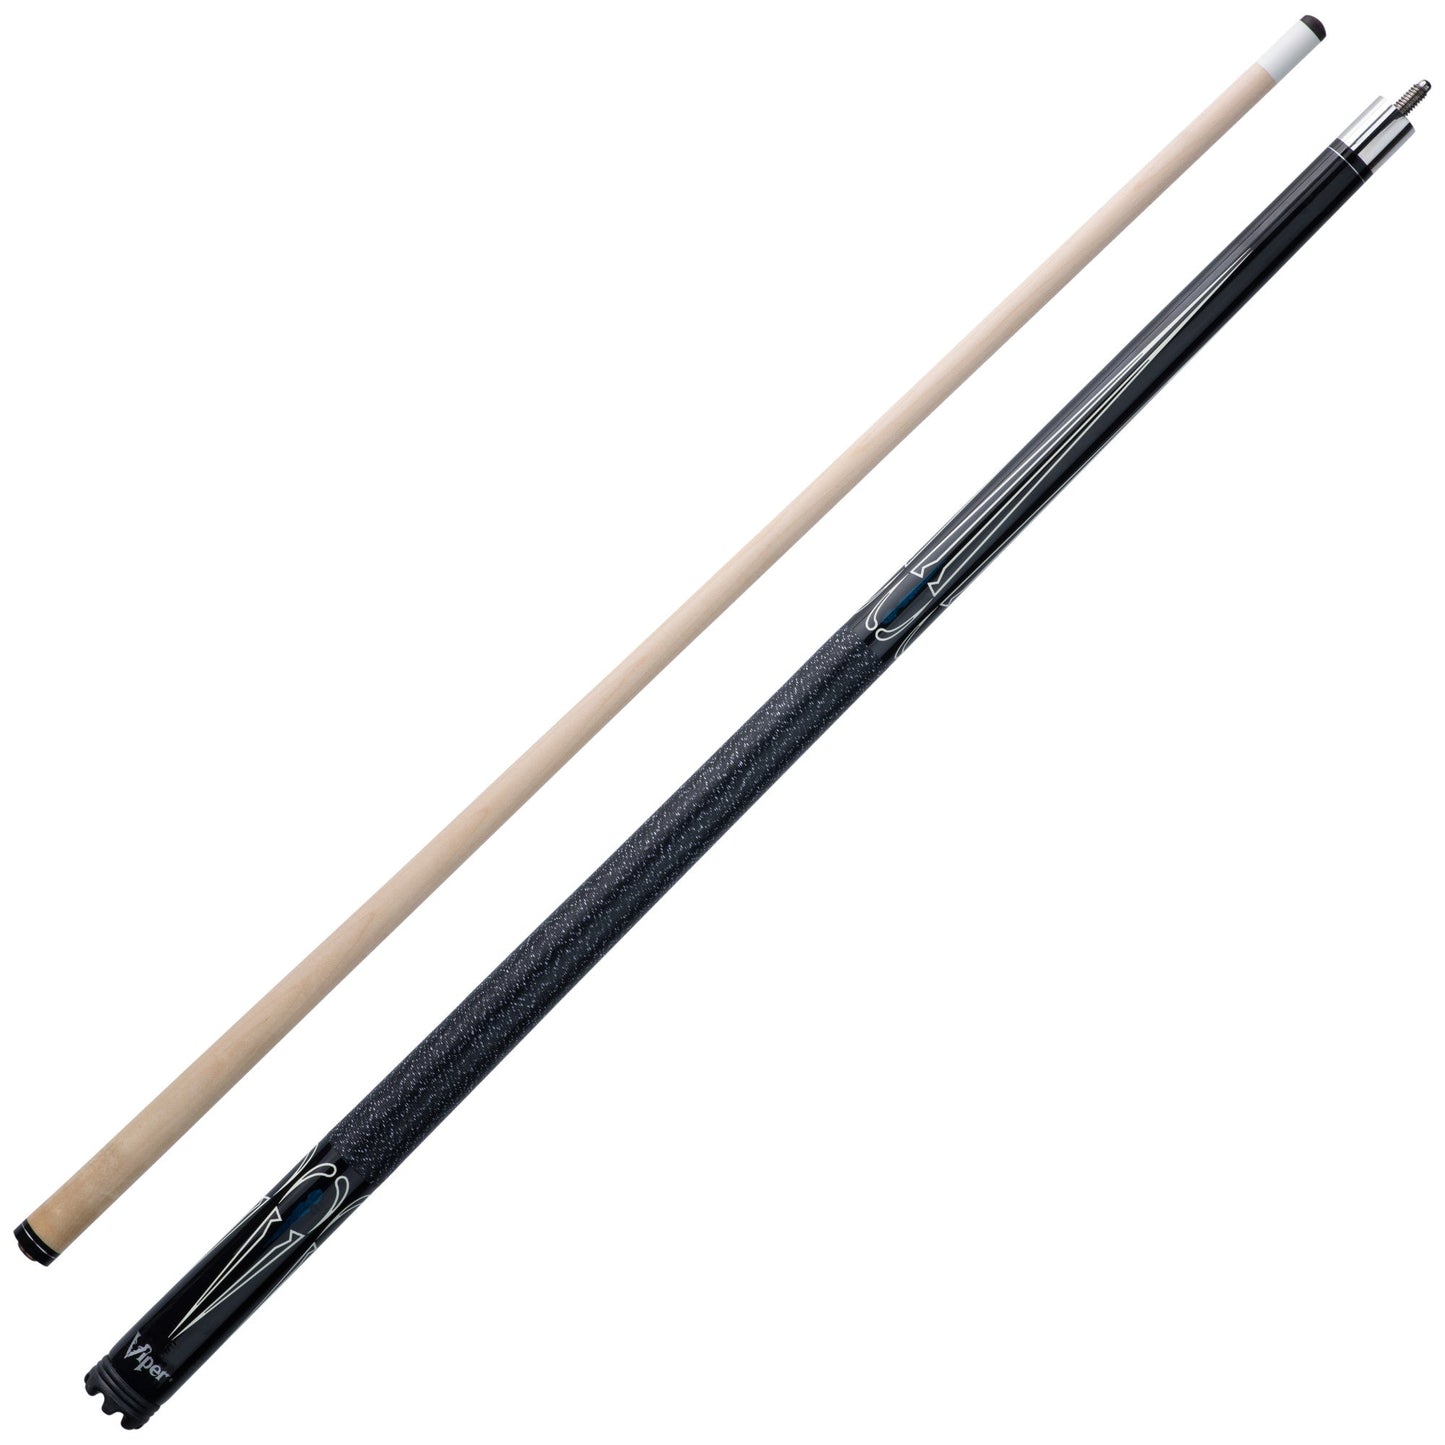 30 - Viper Sinister Black And White Pool Cue Stick 18 Ounce